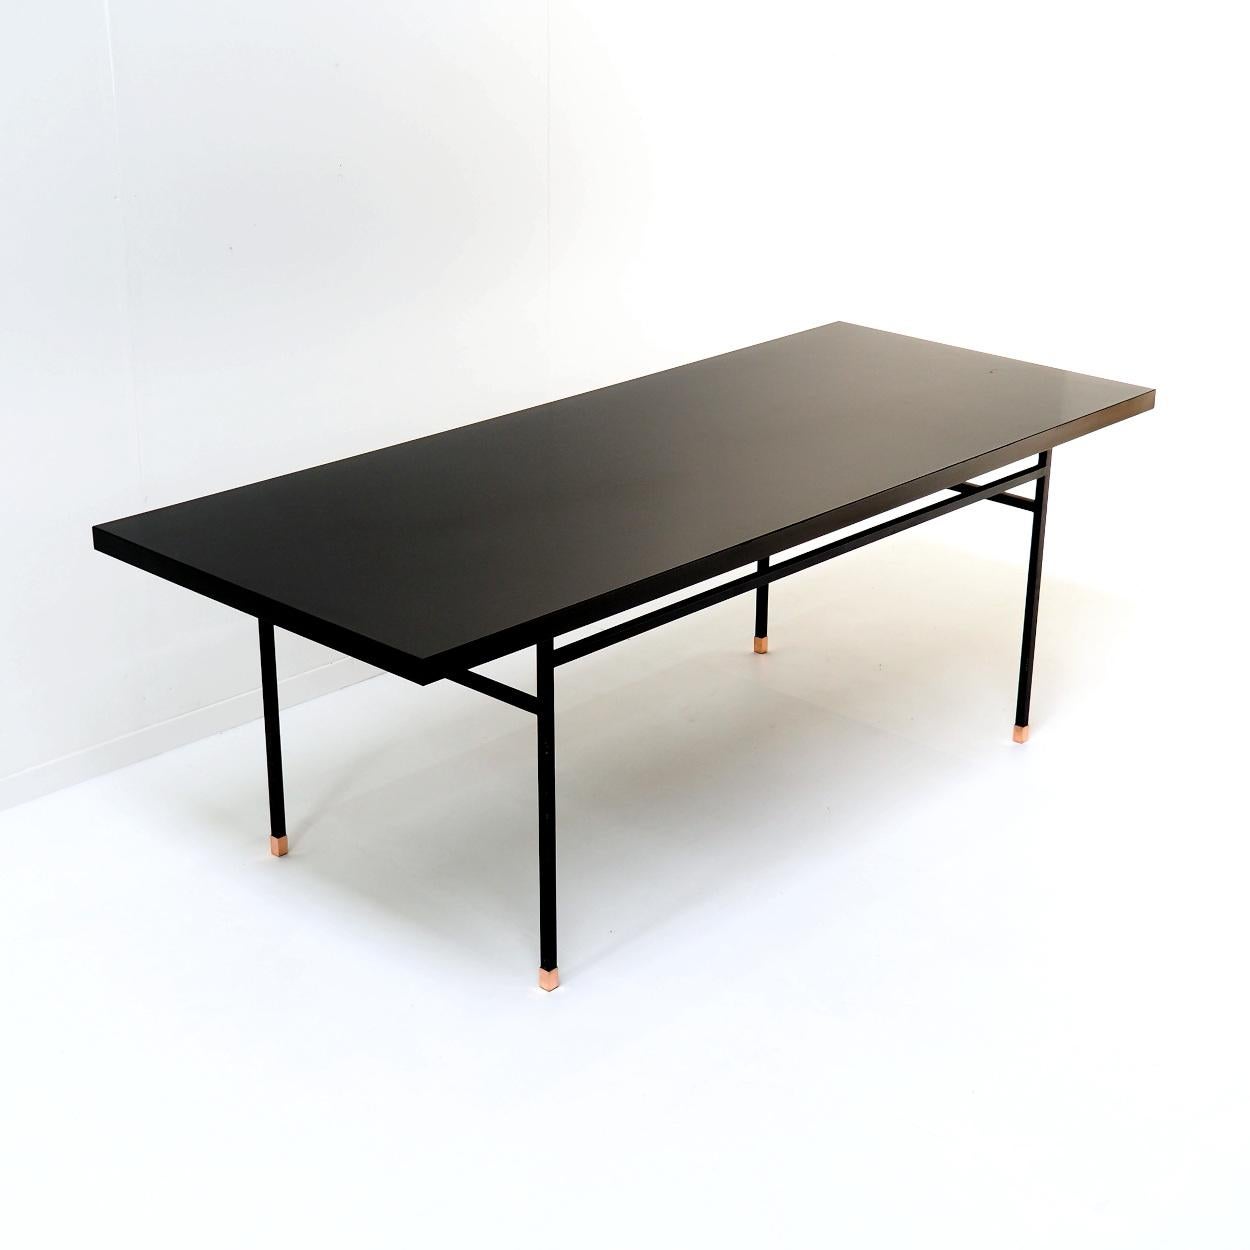 Mid-20th Century Black Table Attr. to French Modernist Designer Paul Geoffroy For Sale